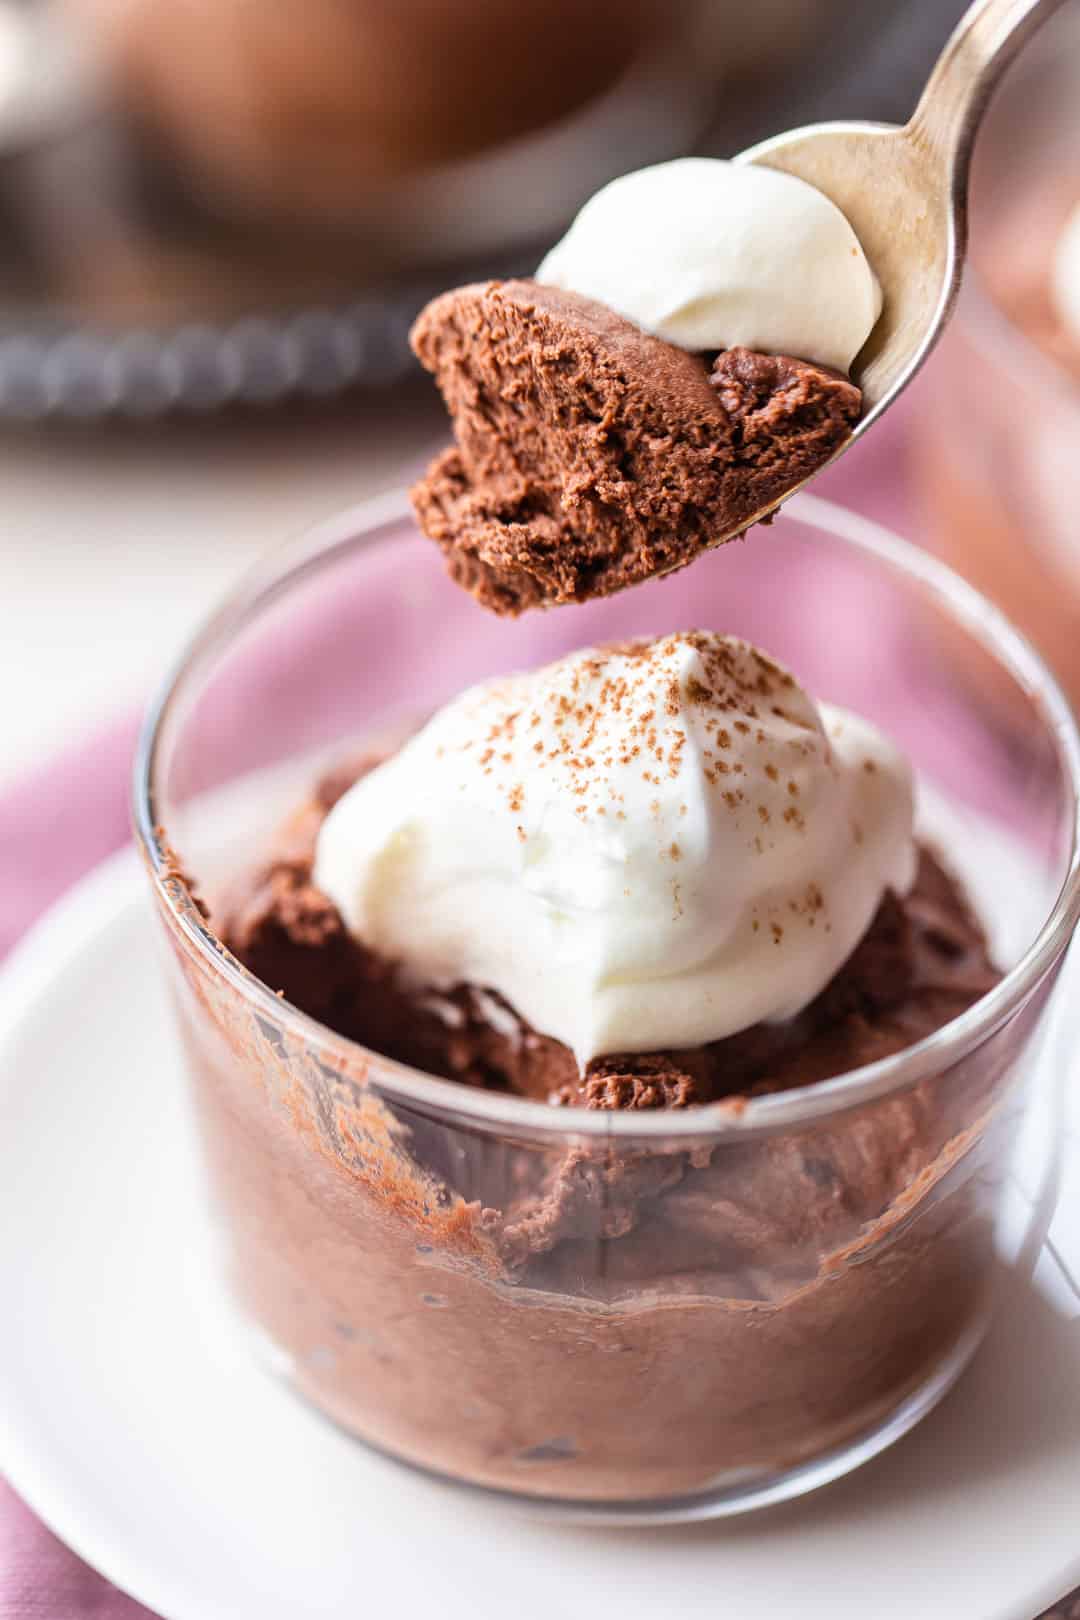 Spooning easy chocolate mousse recipe from a glass bowl with a silver spoon.